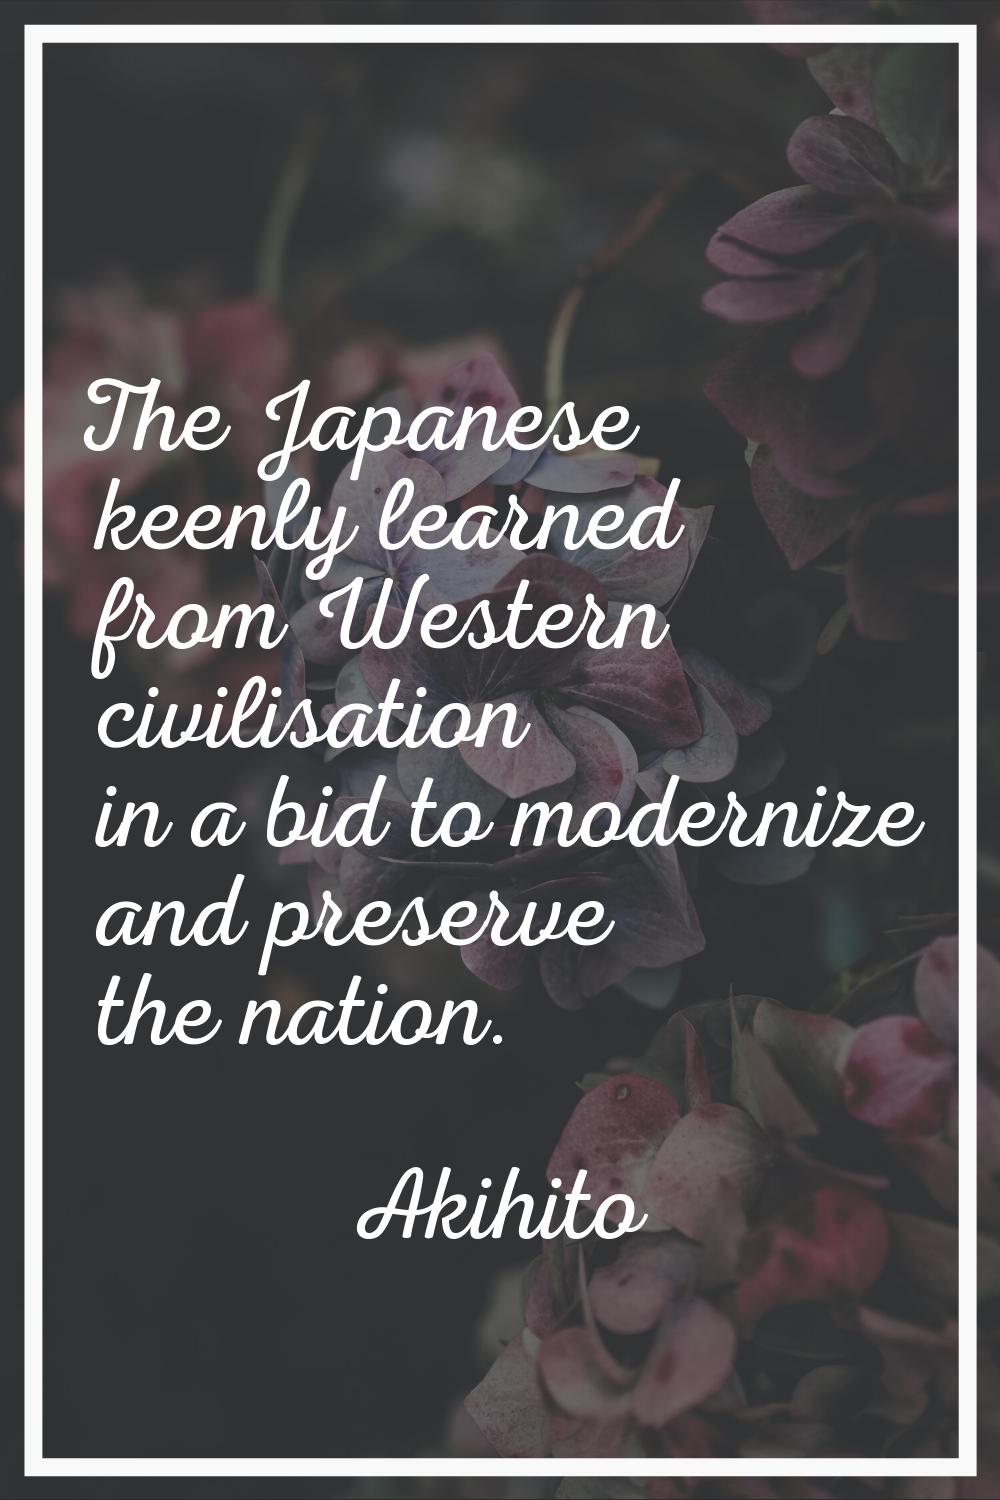 The Japanese keenly learned from Western civilisation in a bid to modernize and preserve the nation